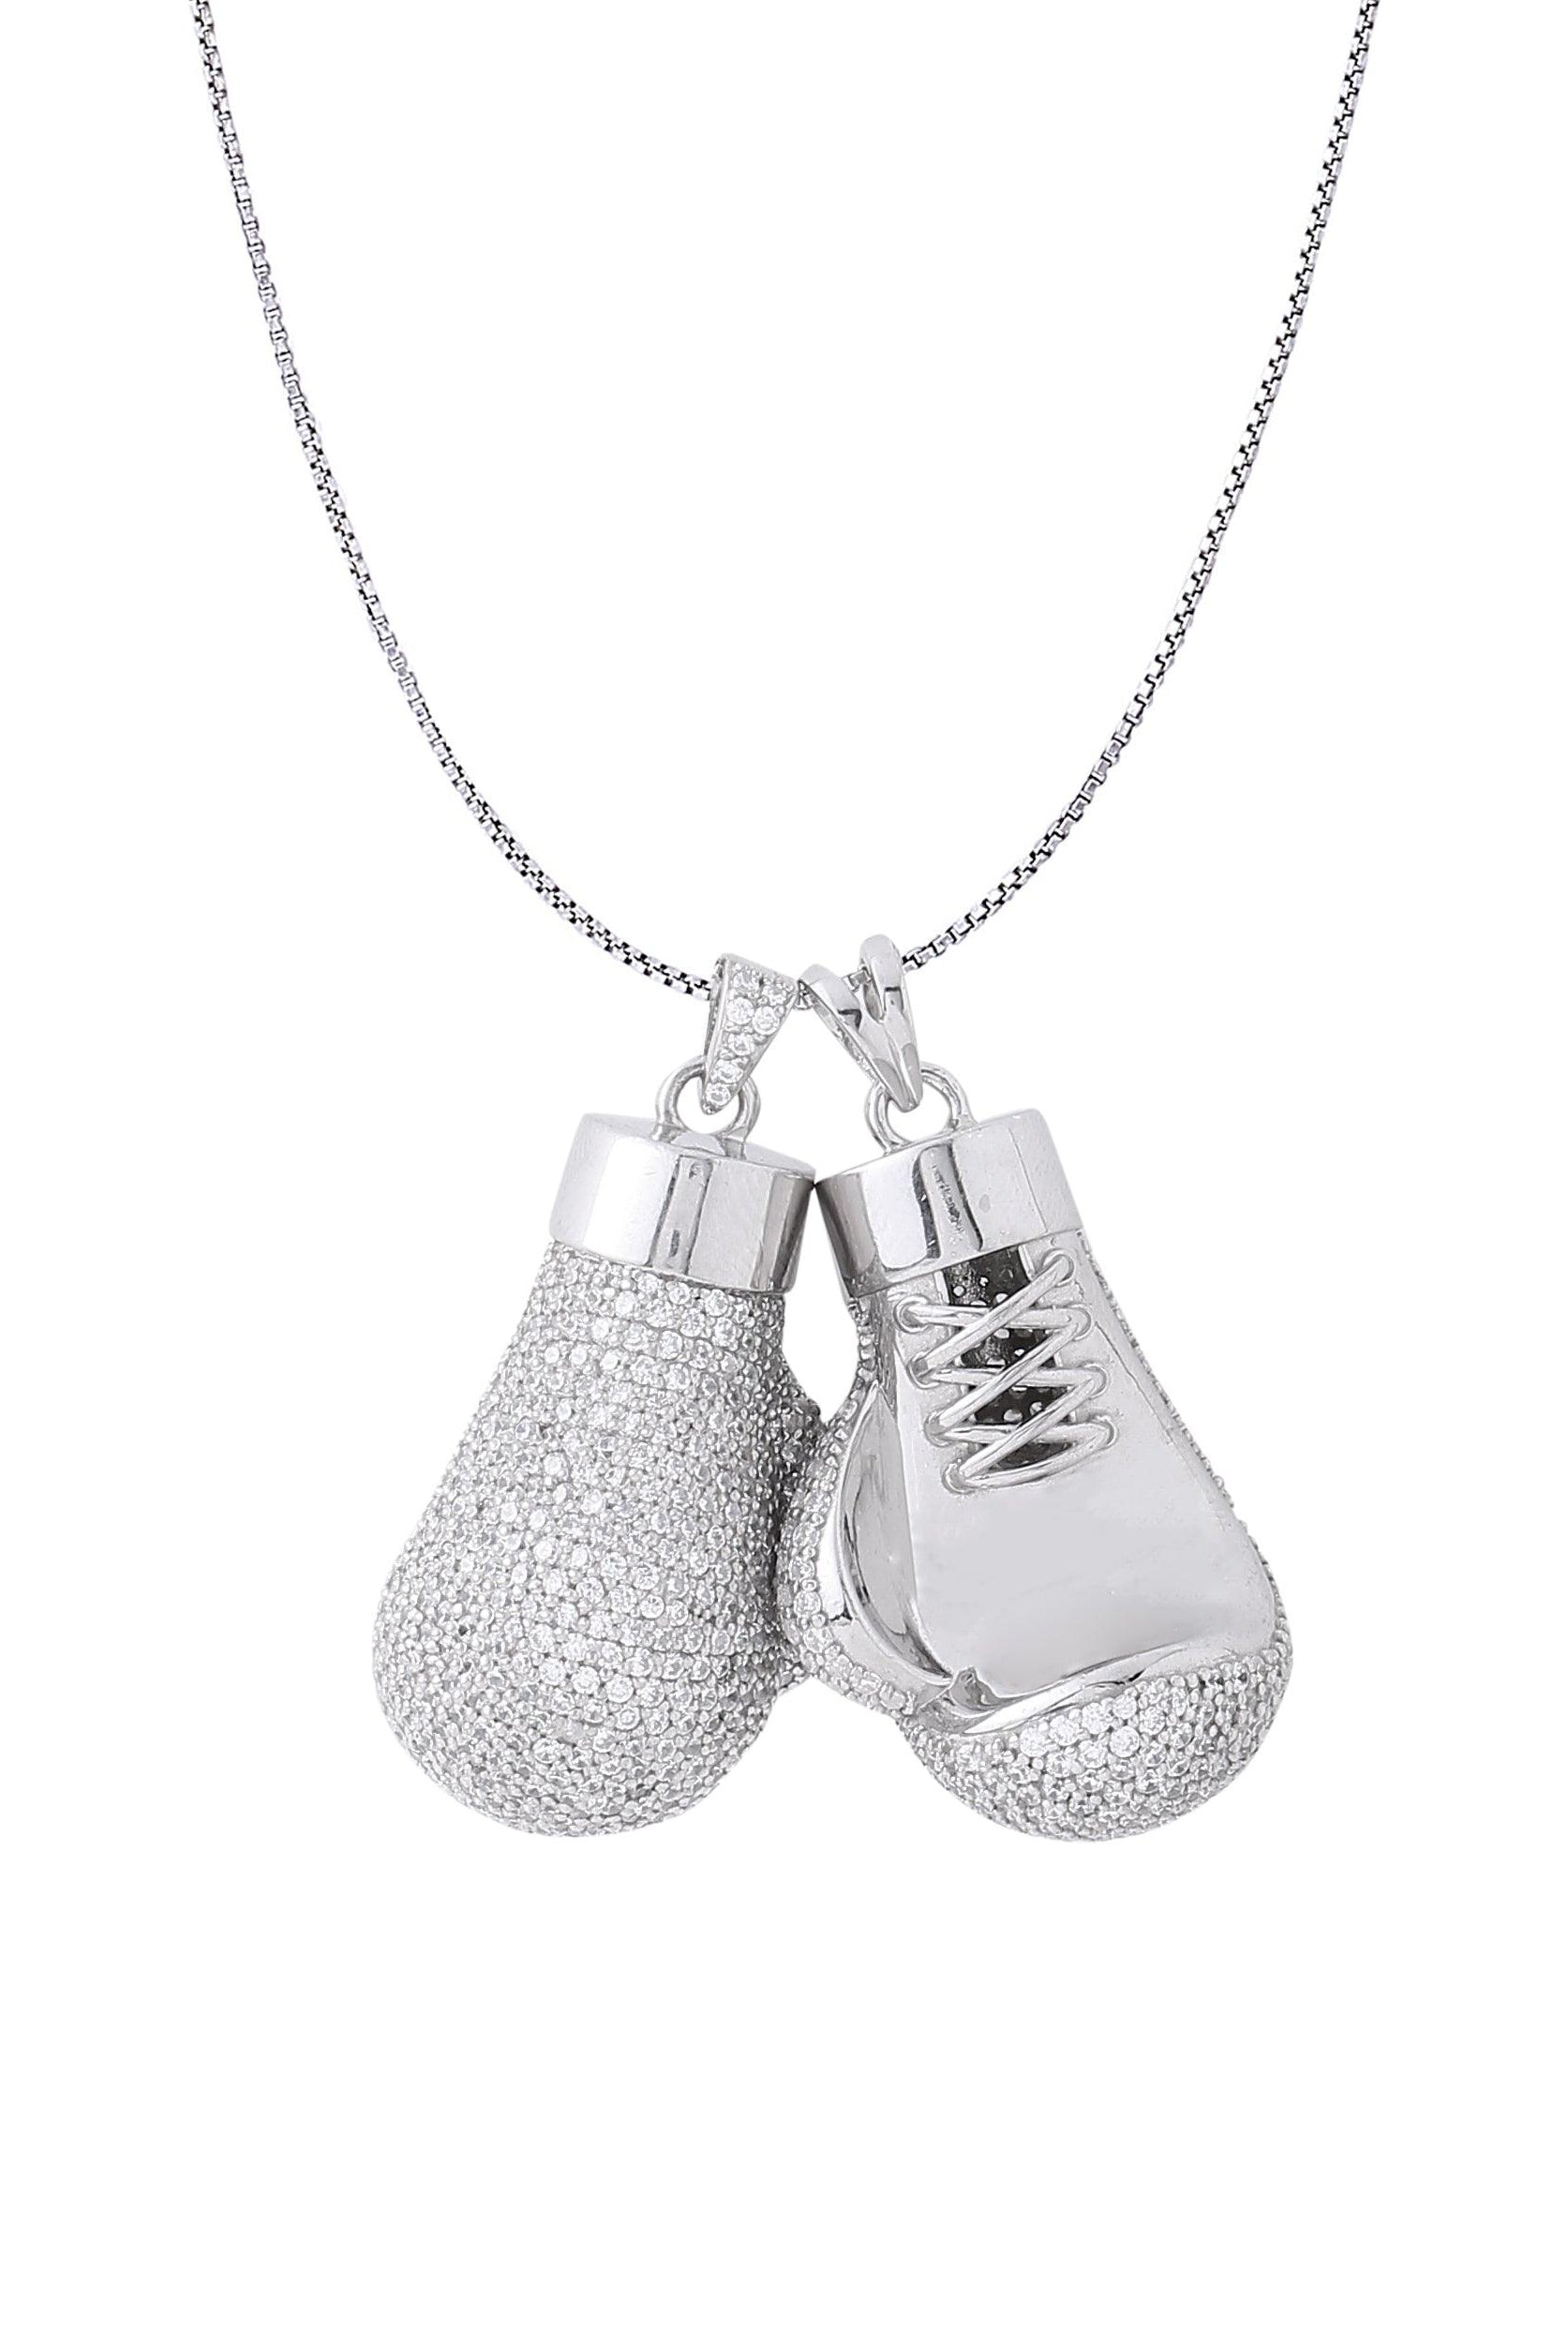 White Gold Color Boxing Gloves Pendant Made of 925 Sterling Silver Material with 20 Inch Long Silver Chain